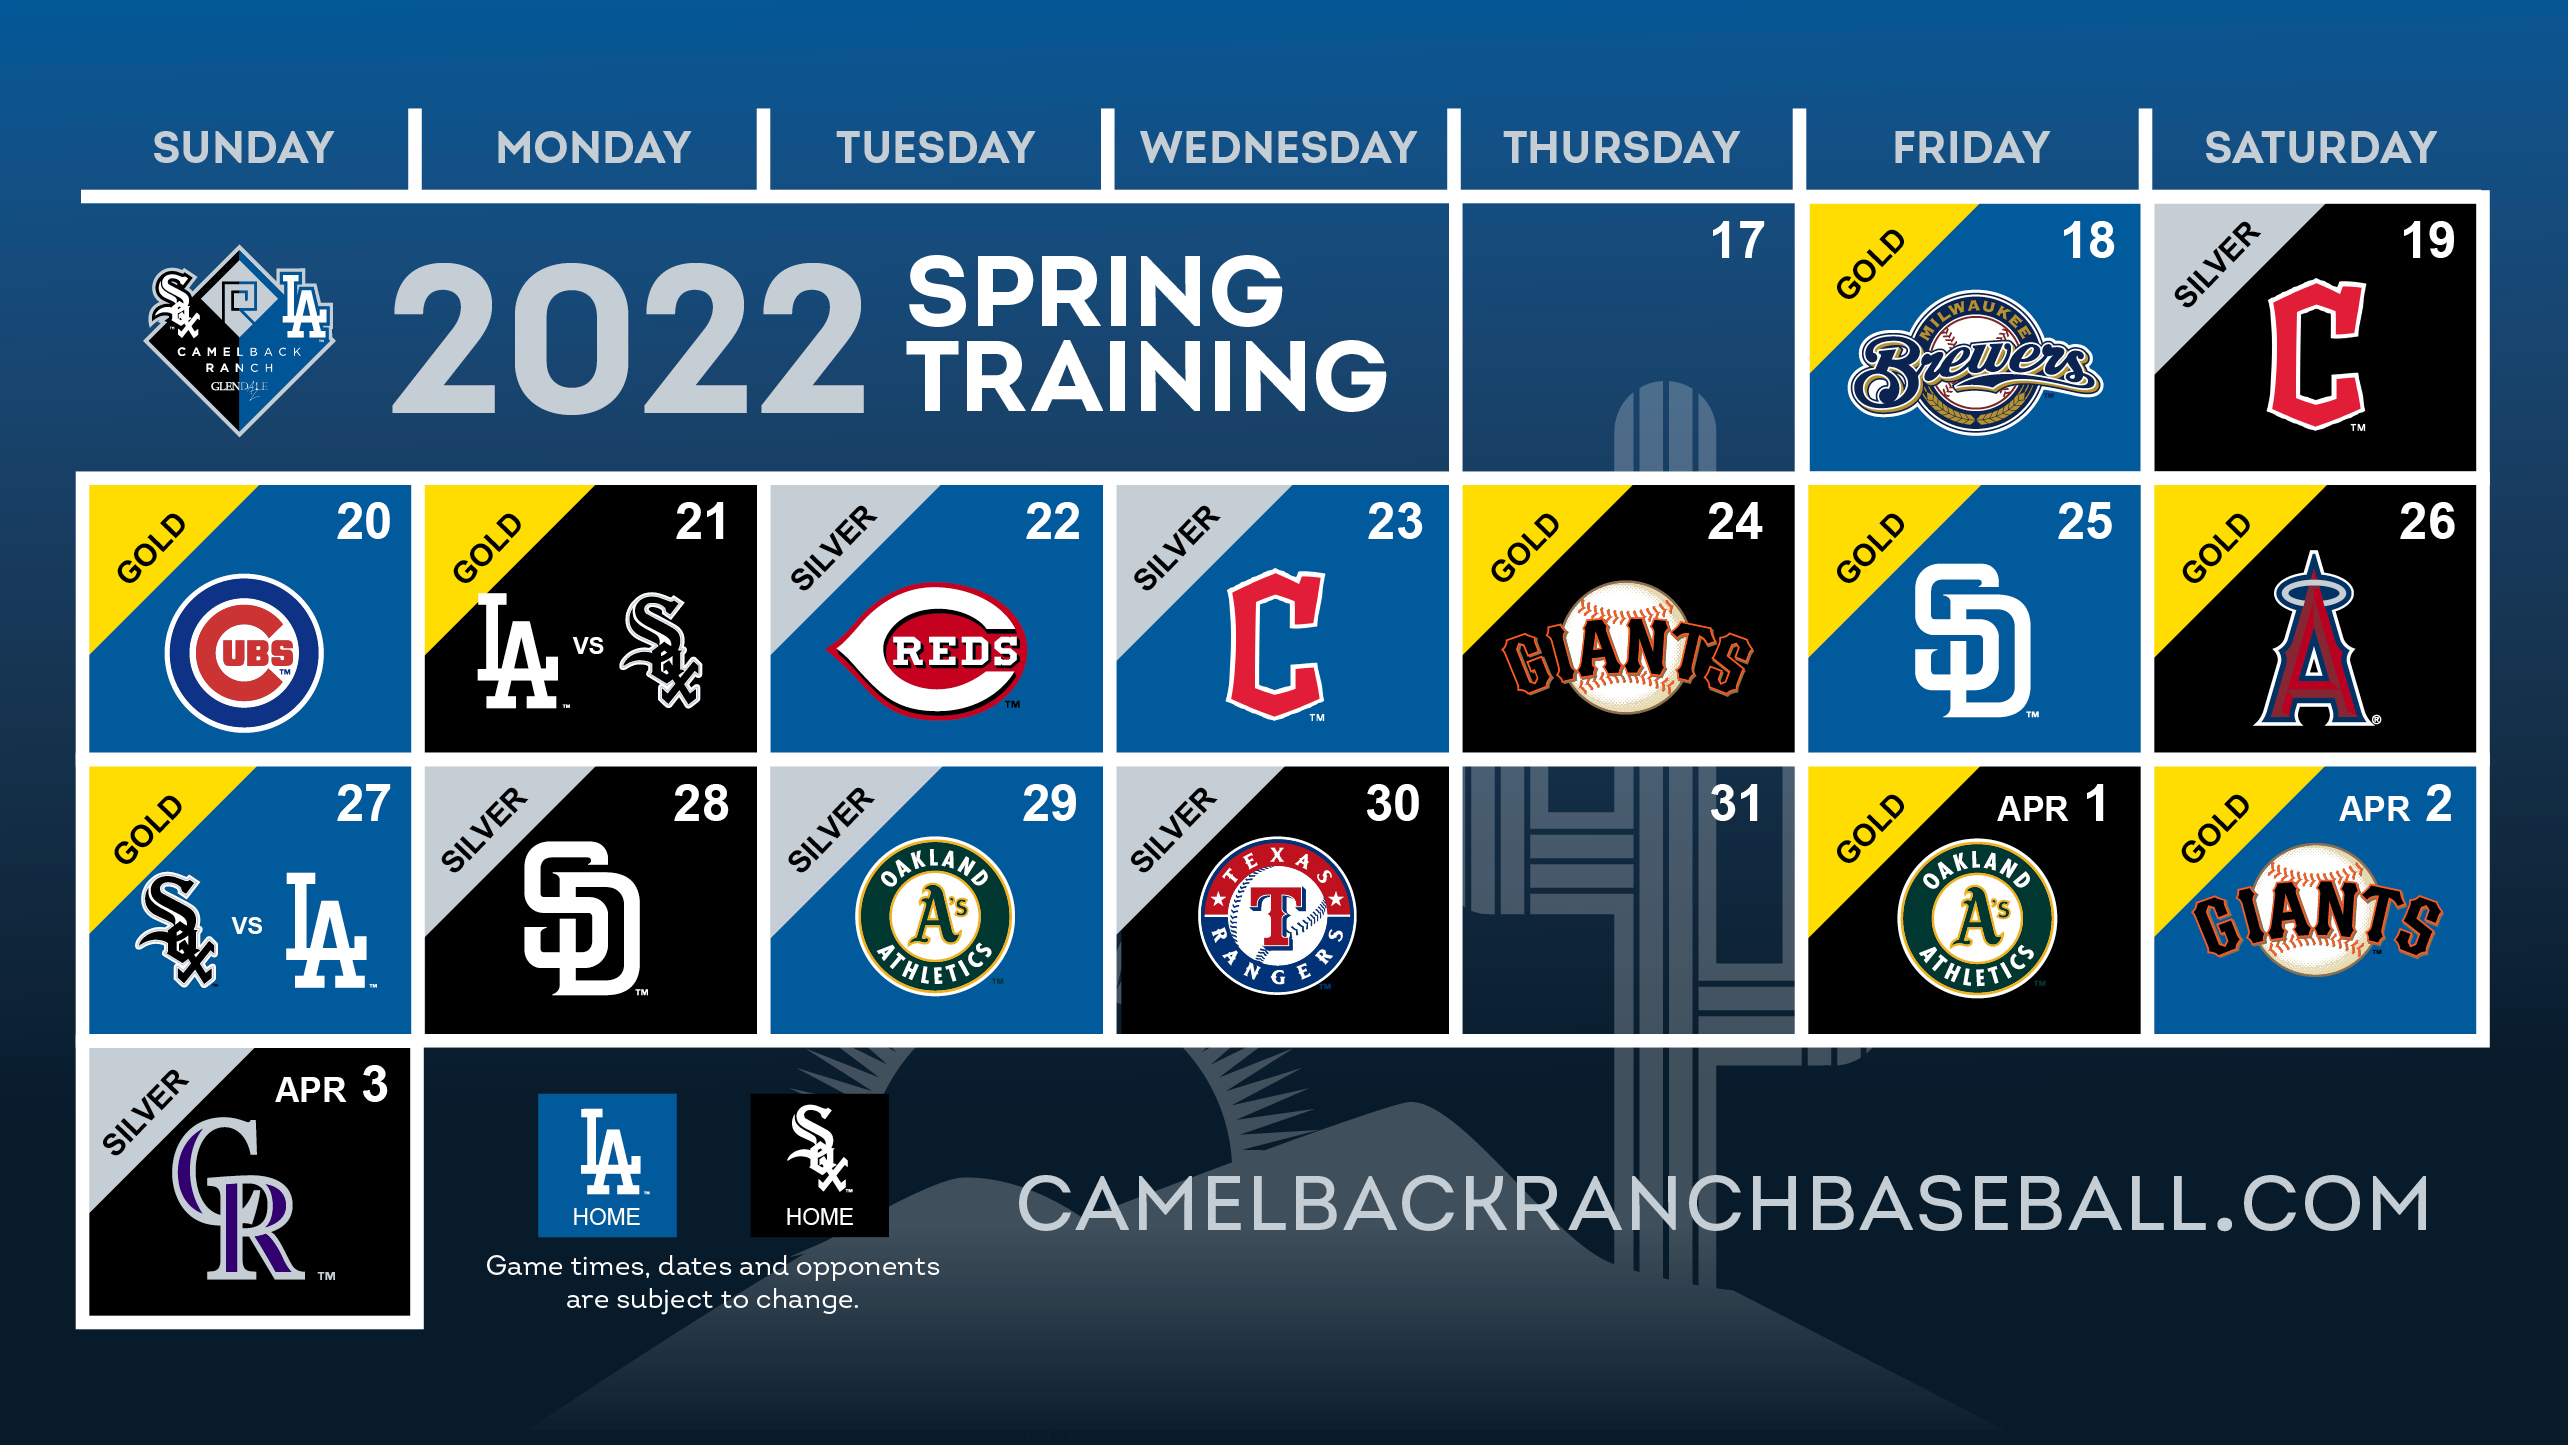 Mst Spring 2022 Schedule March 2022 Schedule | Camelback Ranch | Mlb.com